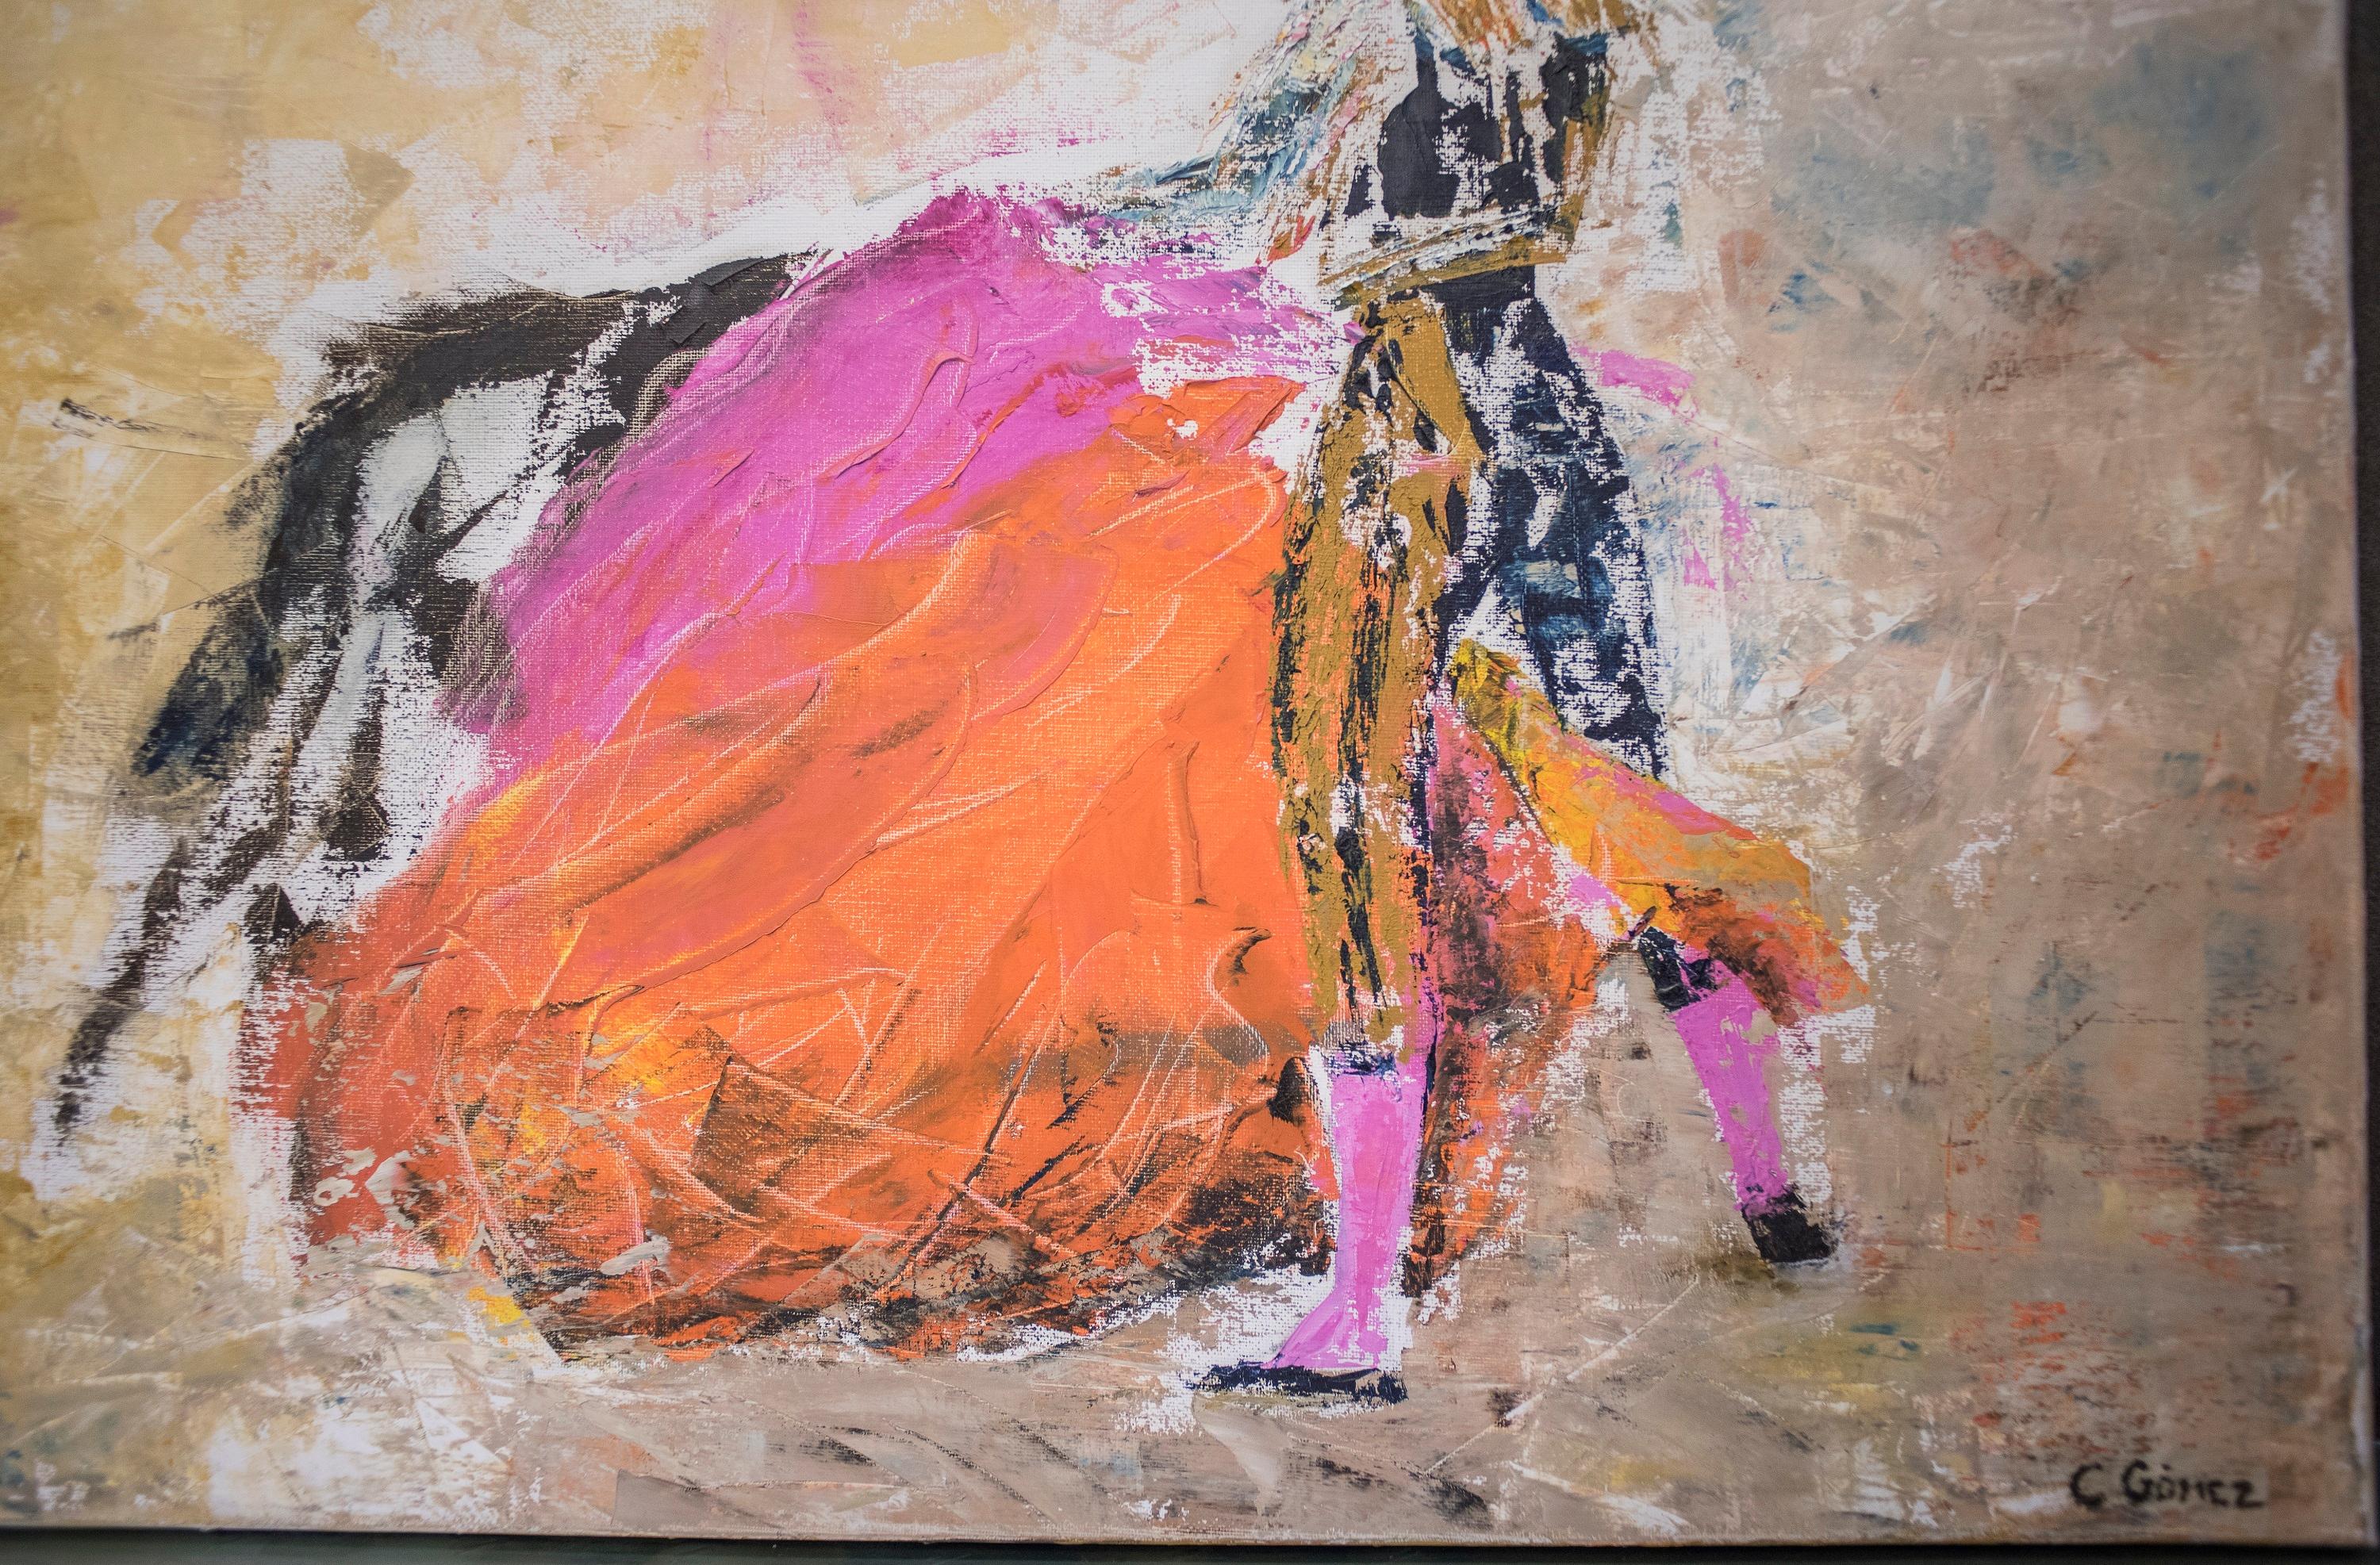 Painted 20th Century Expresionist Orange Pink Oiloncanvas Bullfighter, 1990, Signed